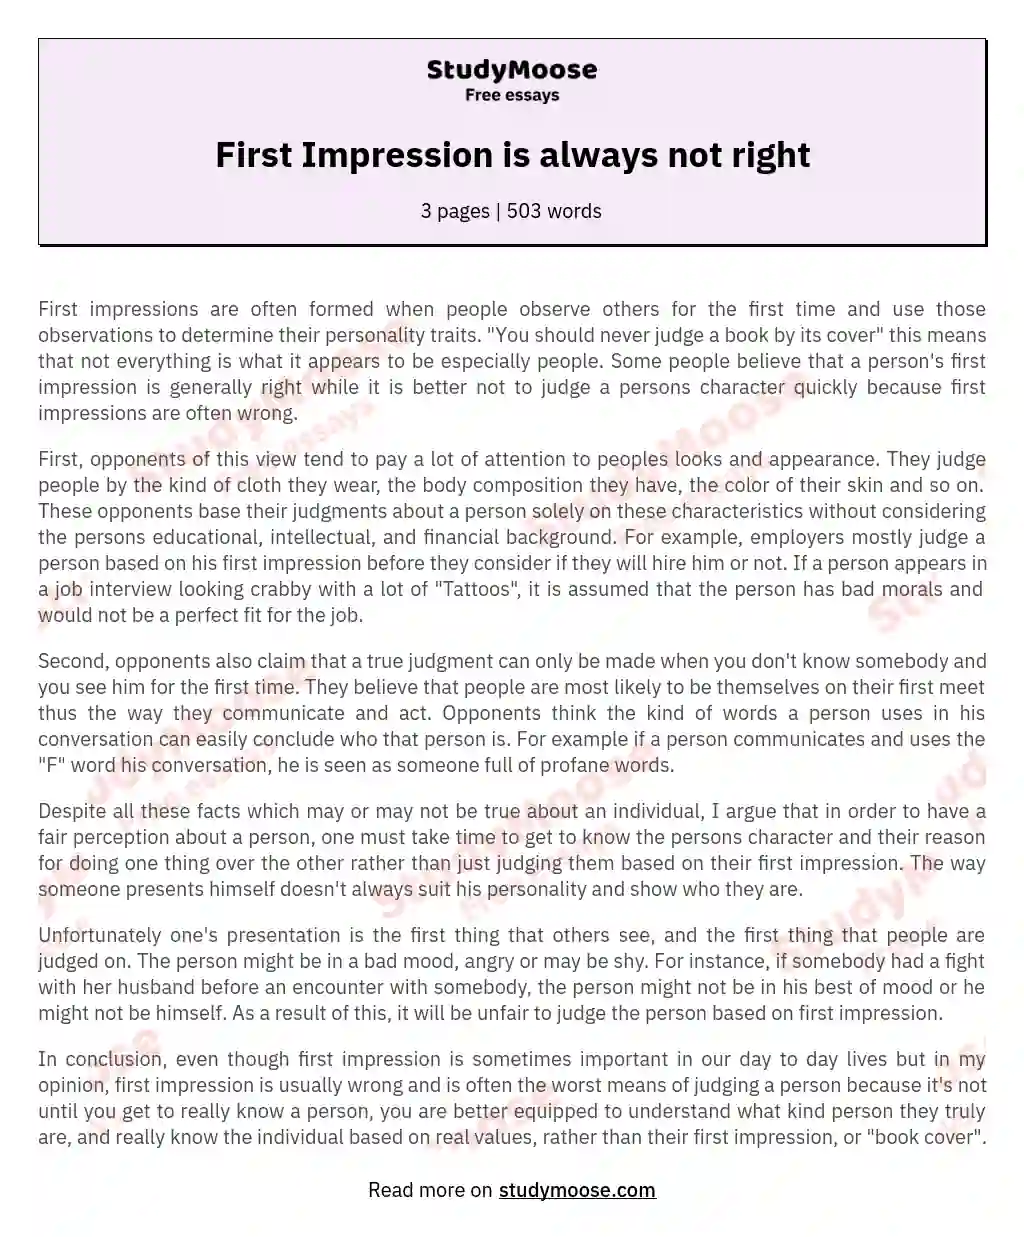 First Impression is always not right essay